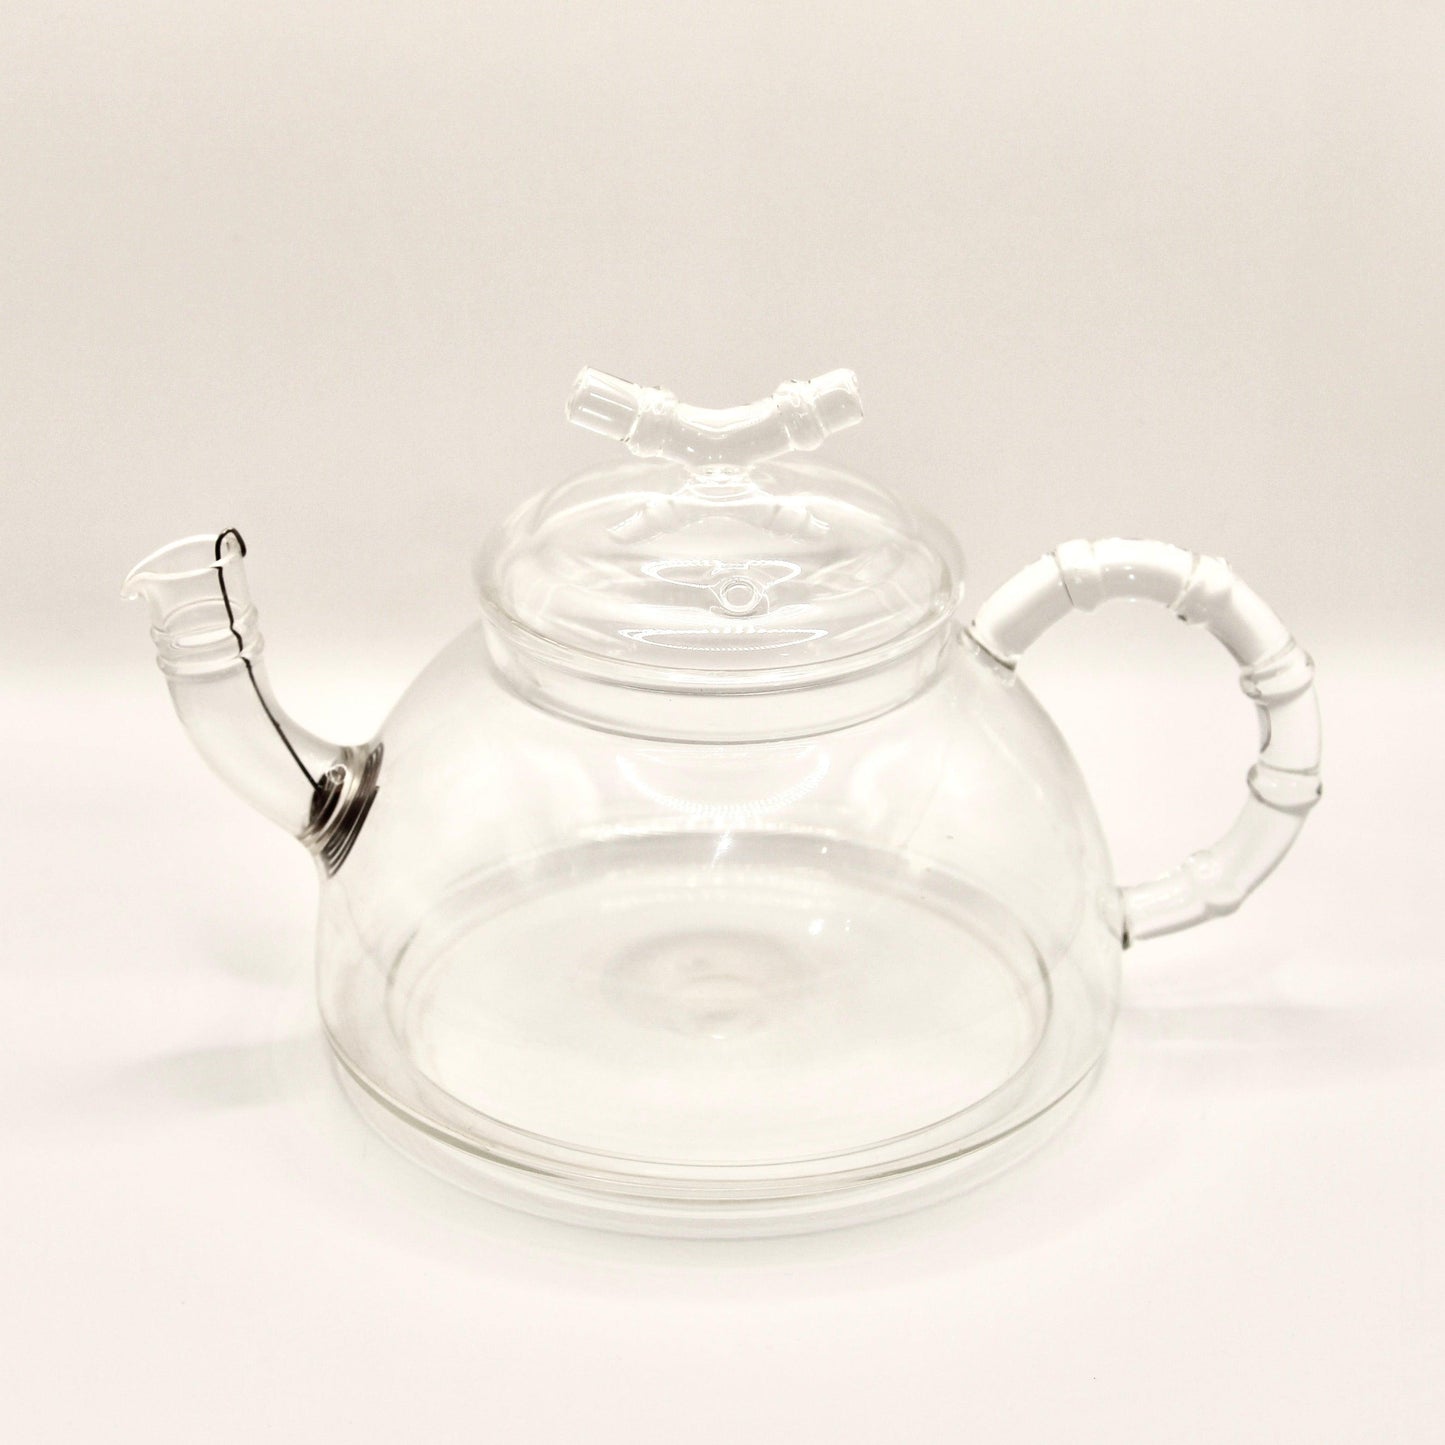 Large Glass Bamboo-Style Teapot - Reduced to Clear!